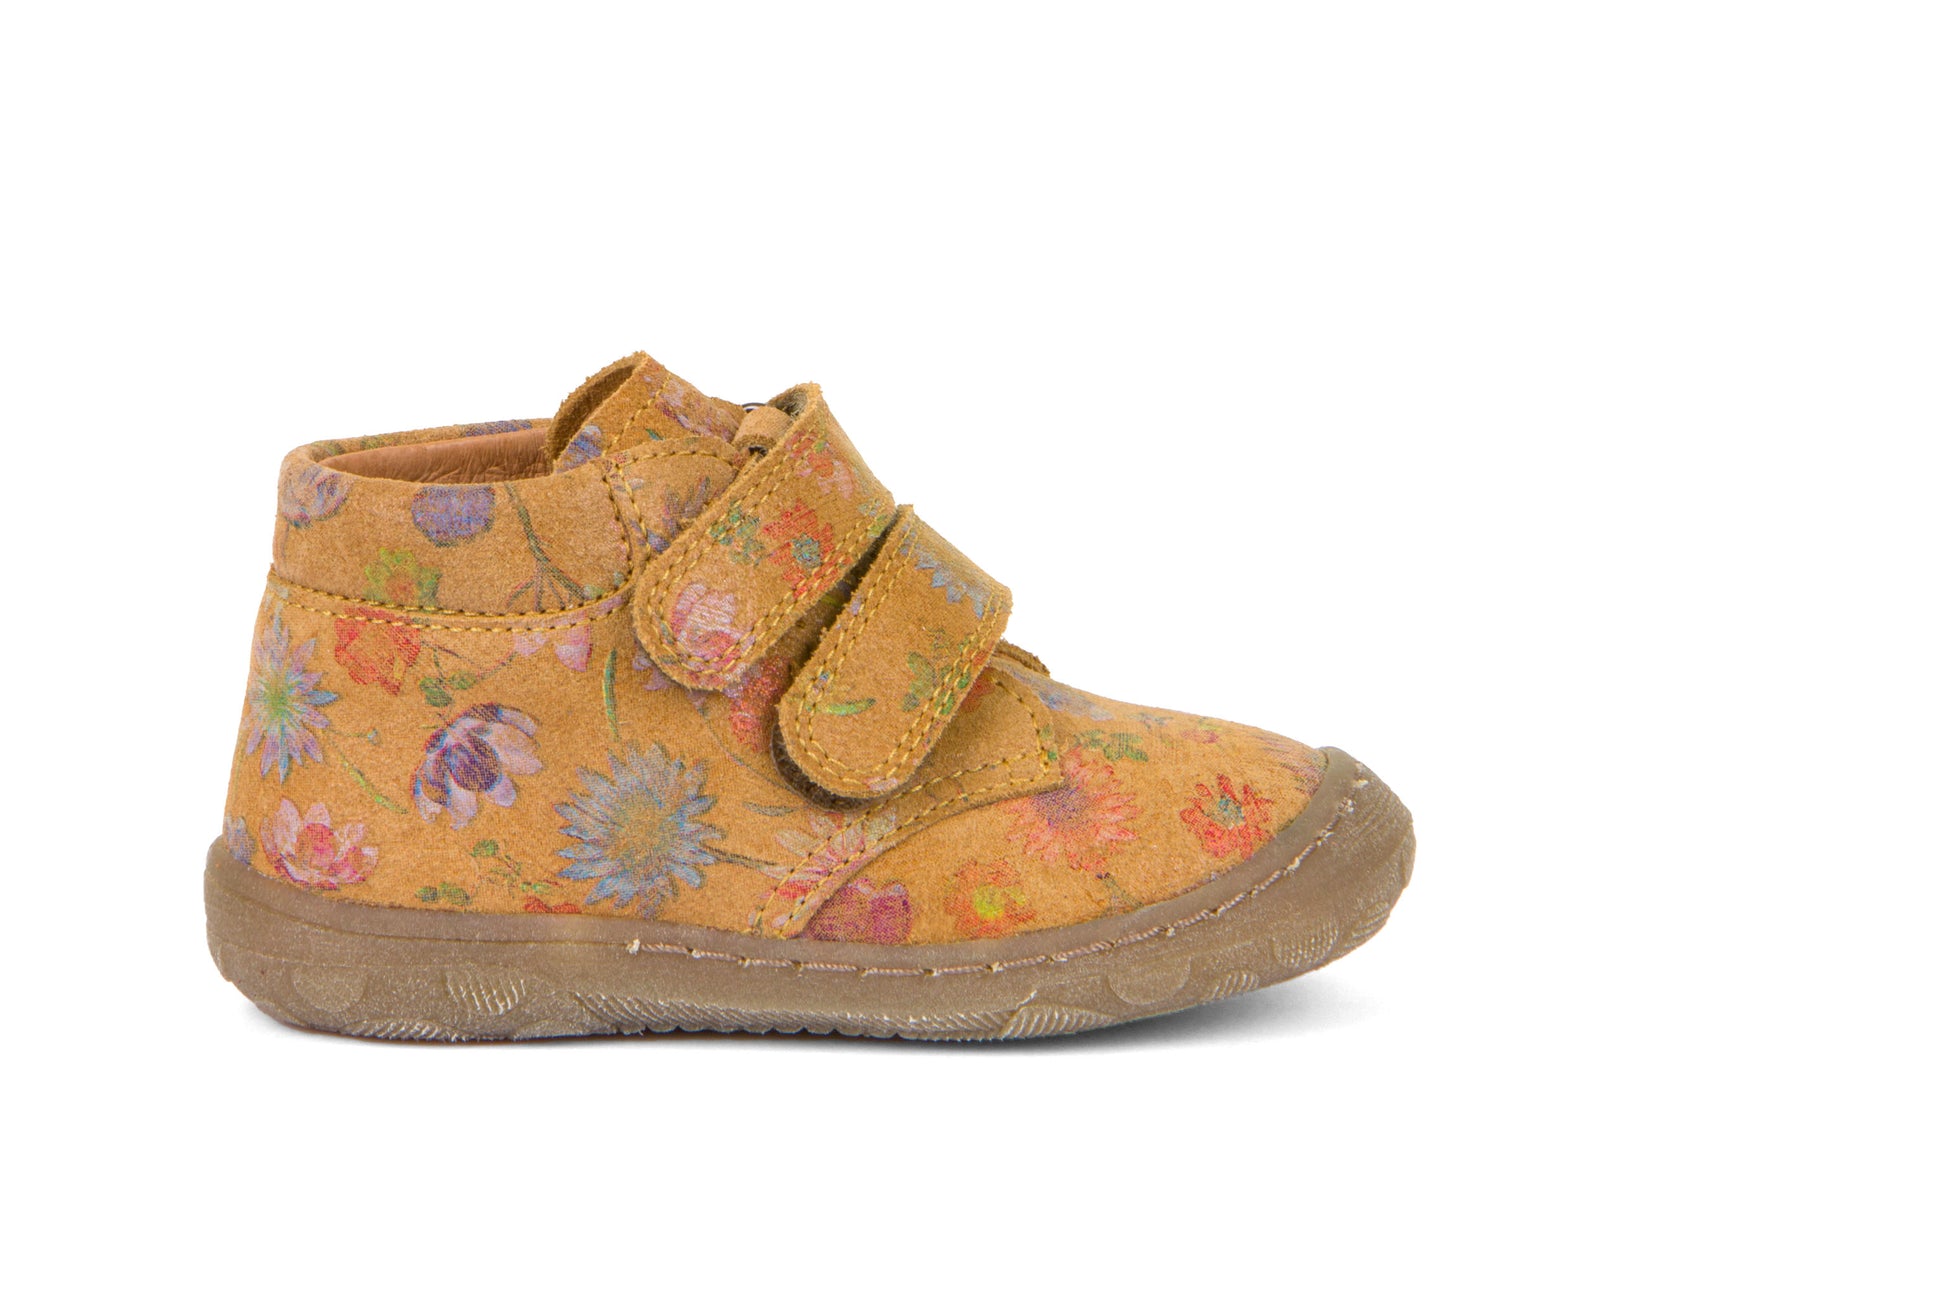 A girls boot by Froddo, style Kart Velcro | G2130272-11 in yellow flower print and double velcro fastening. Right side view.